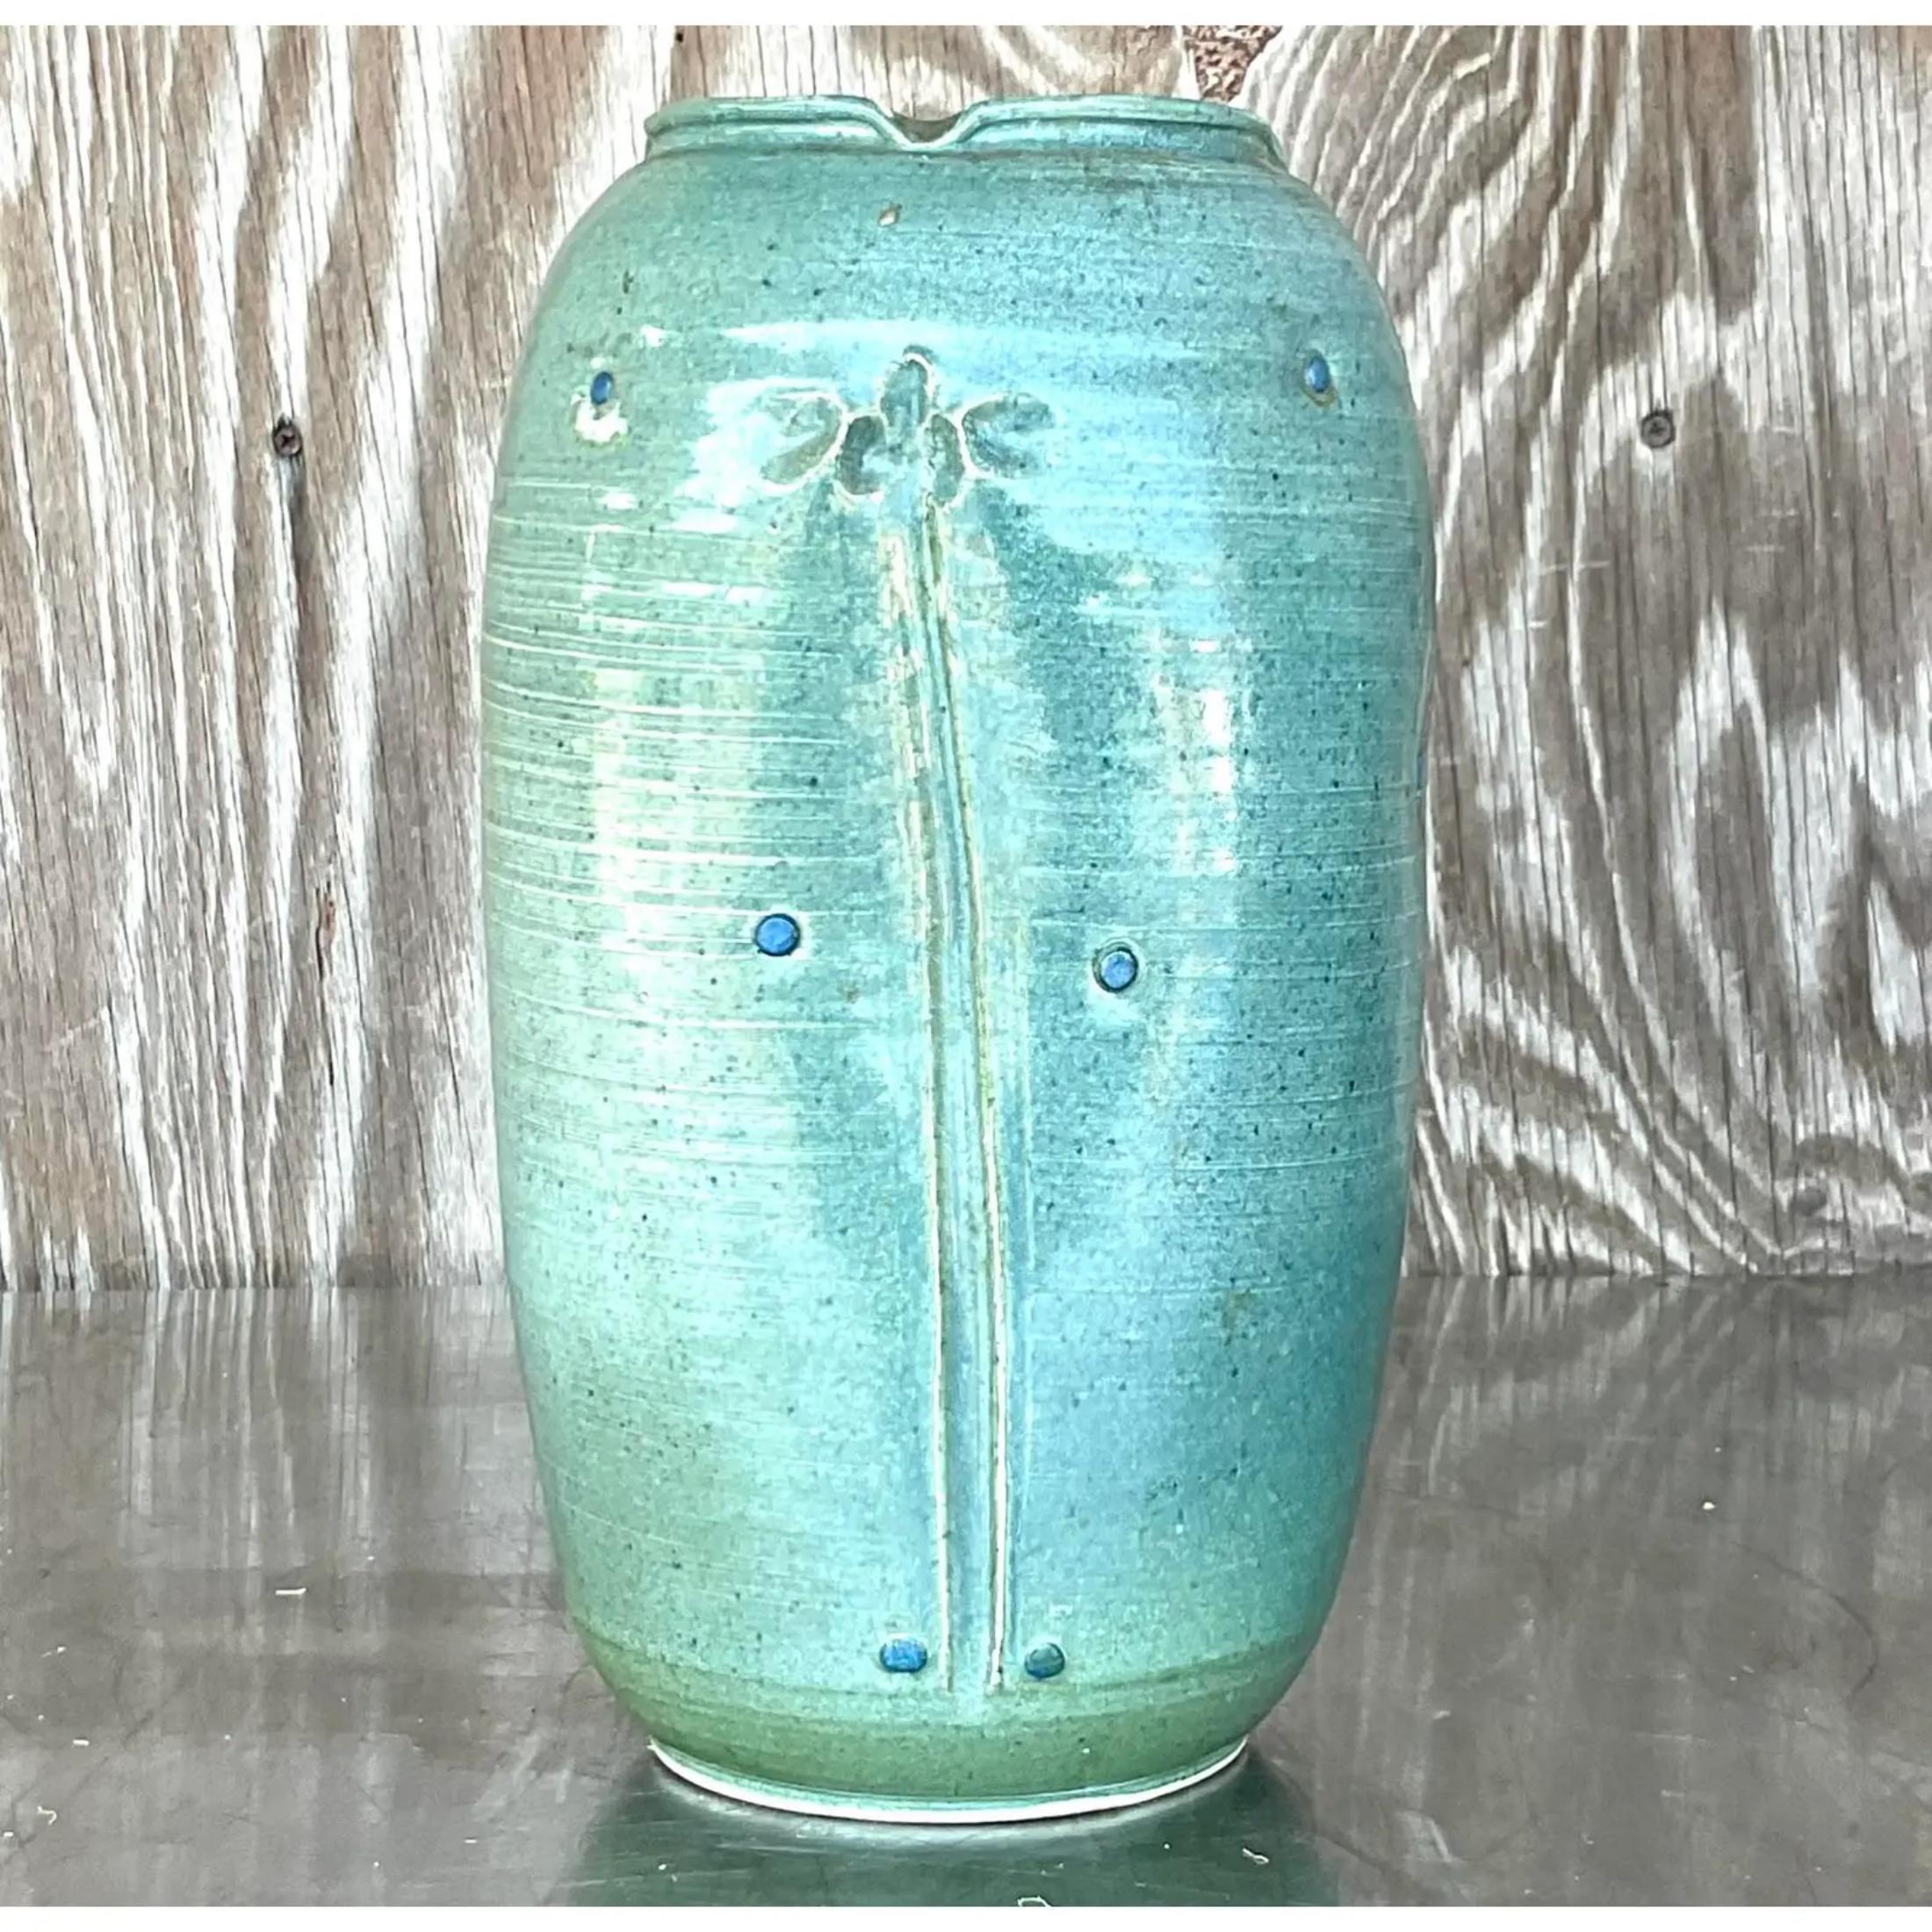 A fabulous vintage Boho studio pottery vase. A chic sea foam green color with lots of great hand wrought detail. Signed on the bottom. Acquired from a Palm a each estate